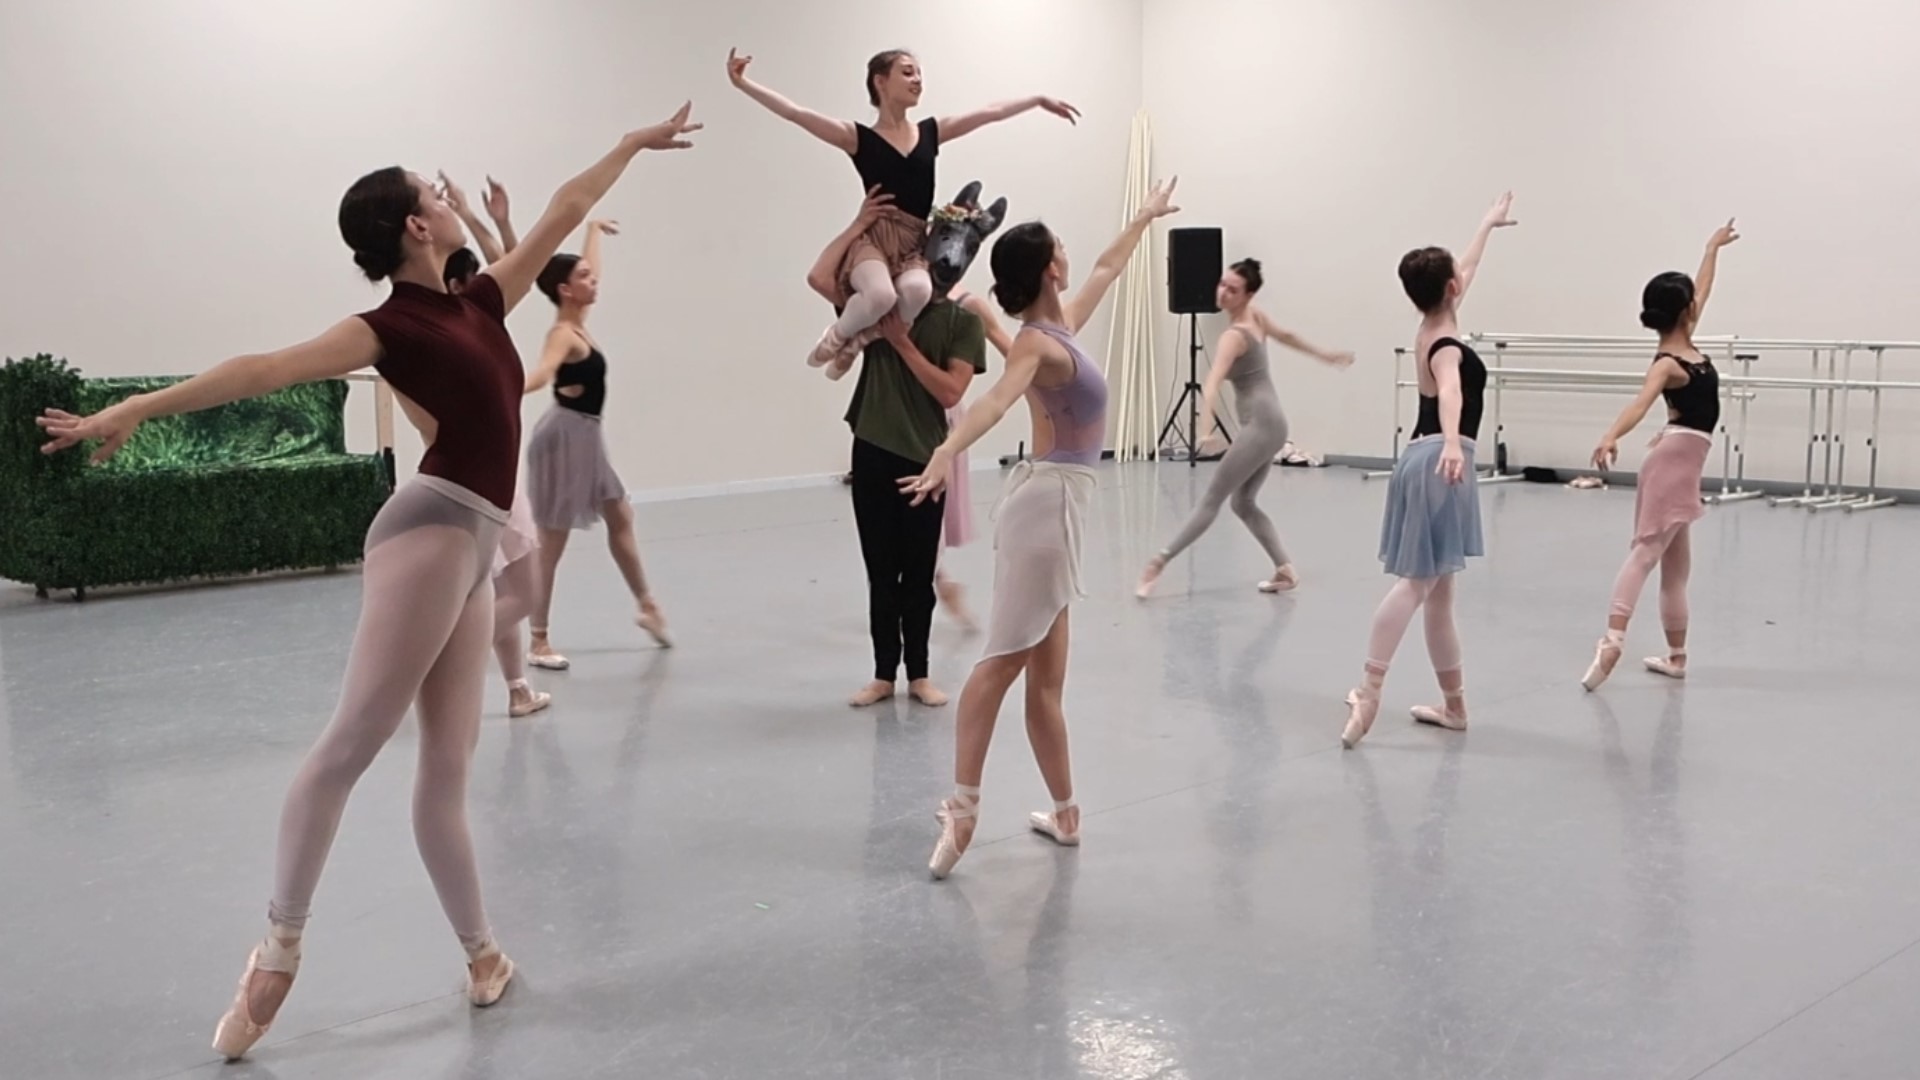 San Antonio’s professional ballet company is wrapping up their 2023-2024 season with the World Premiere of "A Midsummer Night’s Dream."